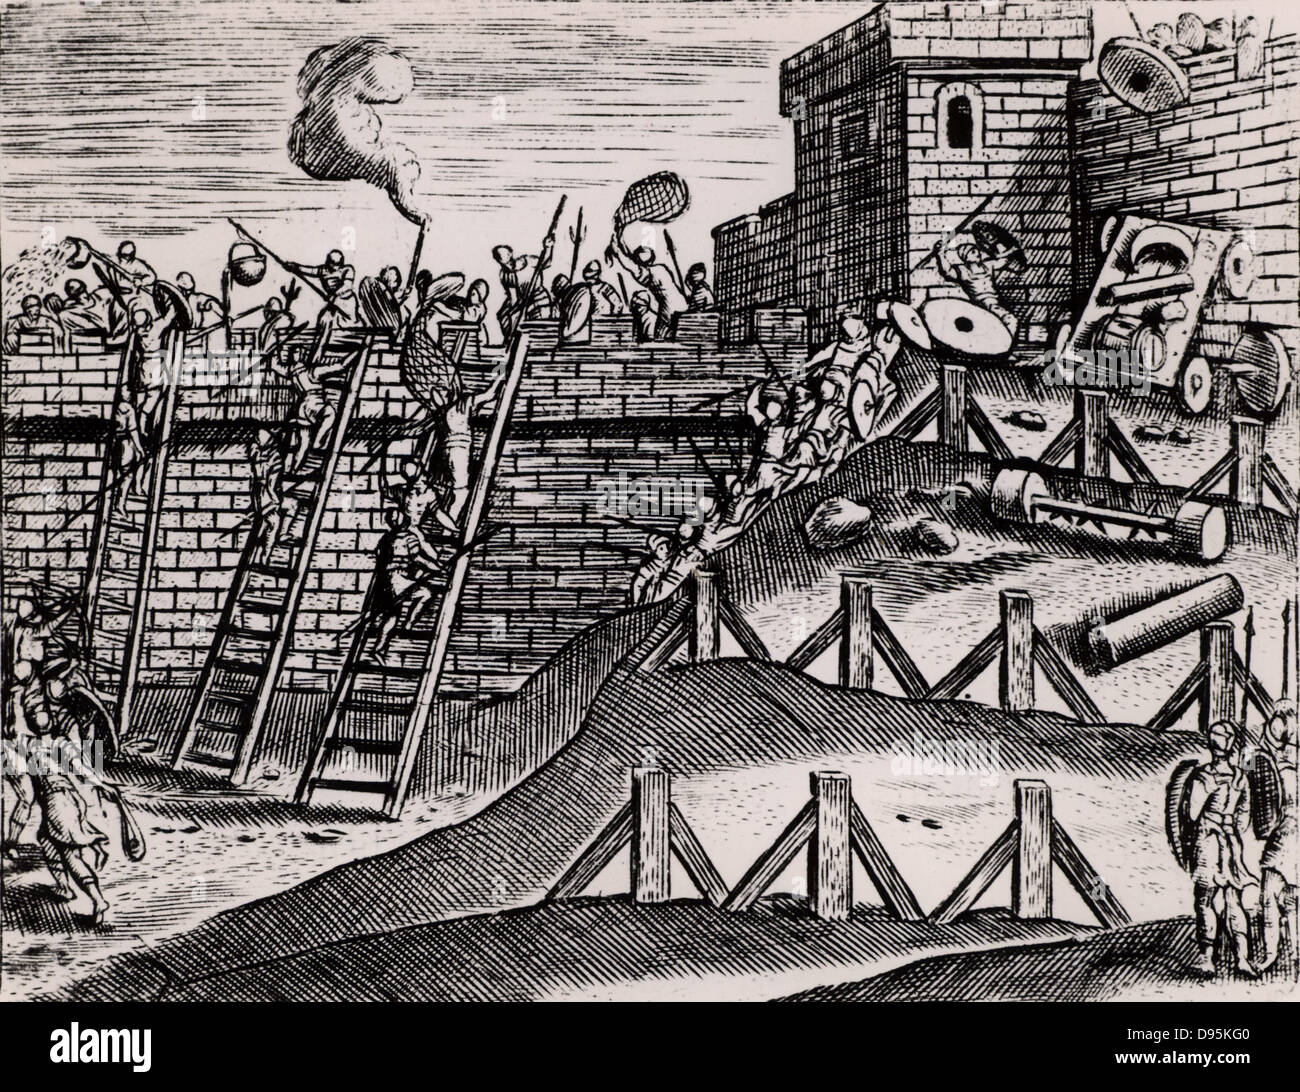 Roman soldiers attacking the walls of a fortress with scaling ladders, slings and spears, while the defenders are holding them off with nets, hot liquid, spears and various missiles. From 'Poliorceticon sive de machinis tormentis telis' by Justus Lipsius  (Joost Lips), Antwerp, 1605. Stock Photo